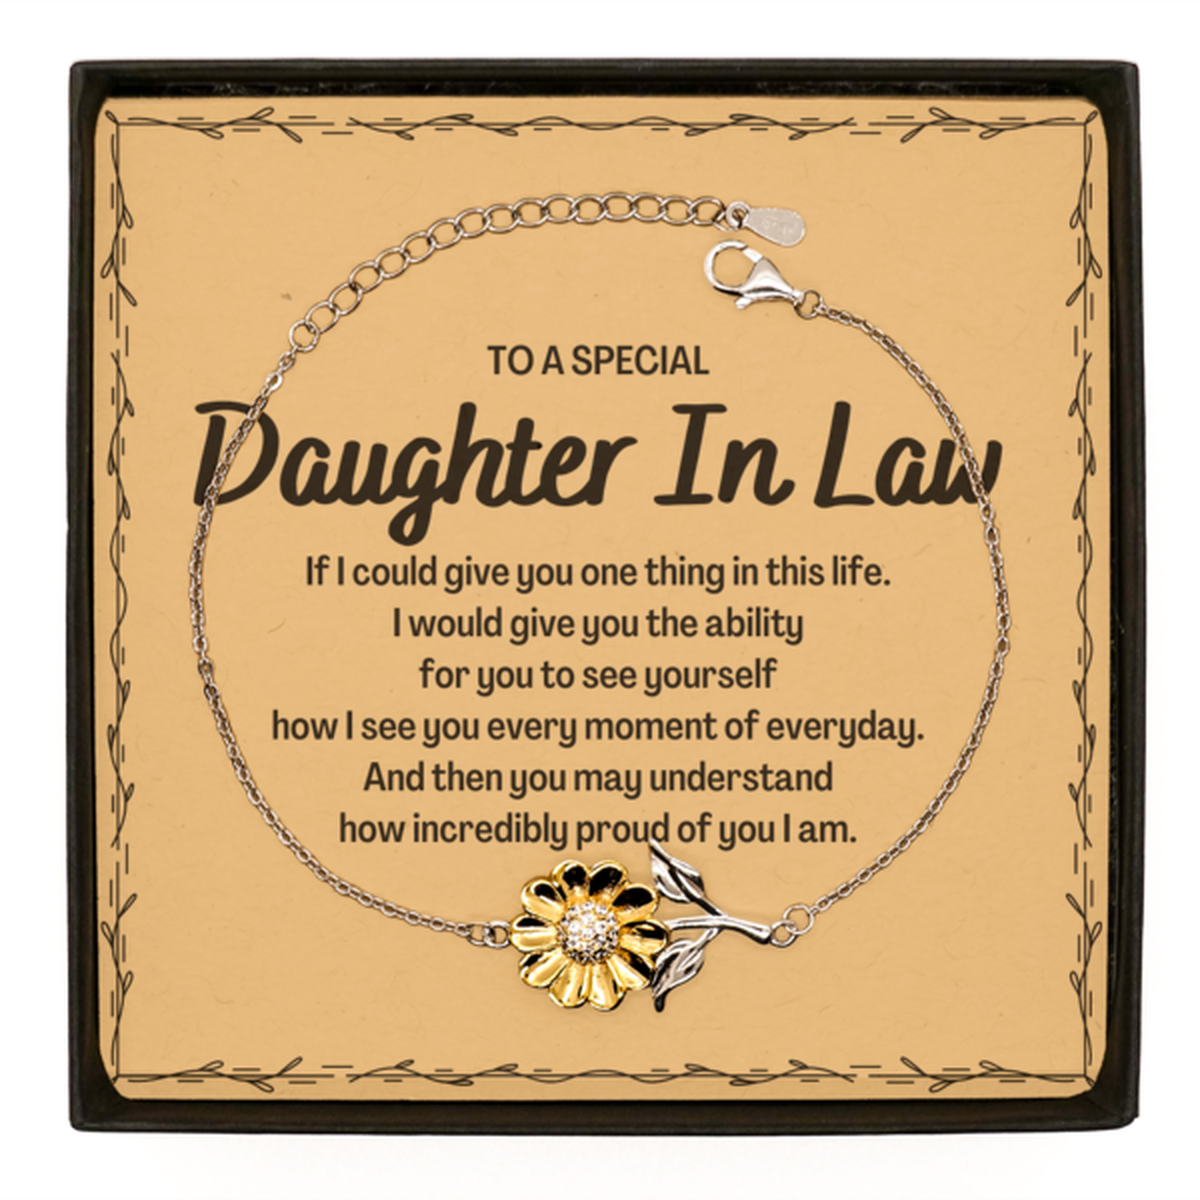 To My Daughter In Law Sunflower Bracelet, Gifts For Daughter In Law Message Card, Inspirational Gifts for Christmas Birthday, Epic Gifts for Daughter In Law To A Special Daughter In Law how incredibly proud of you I am